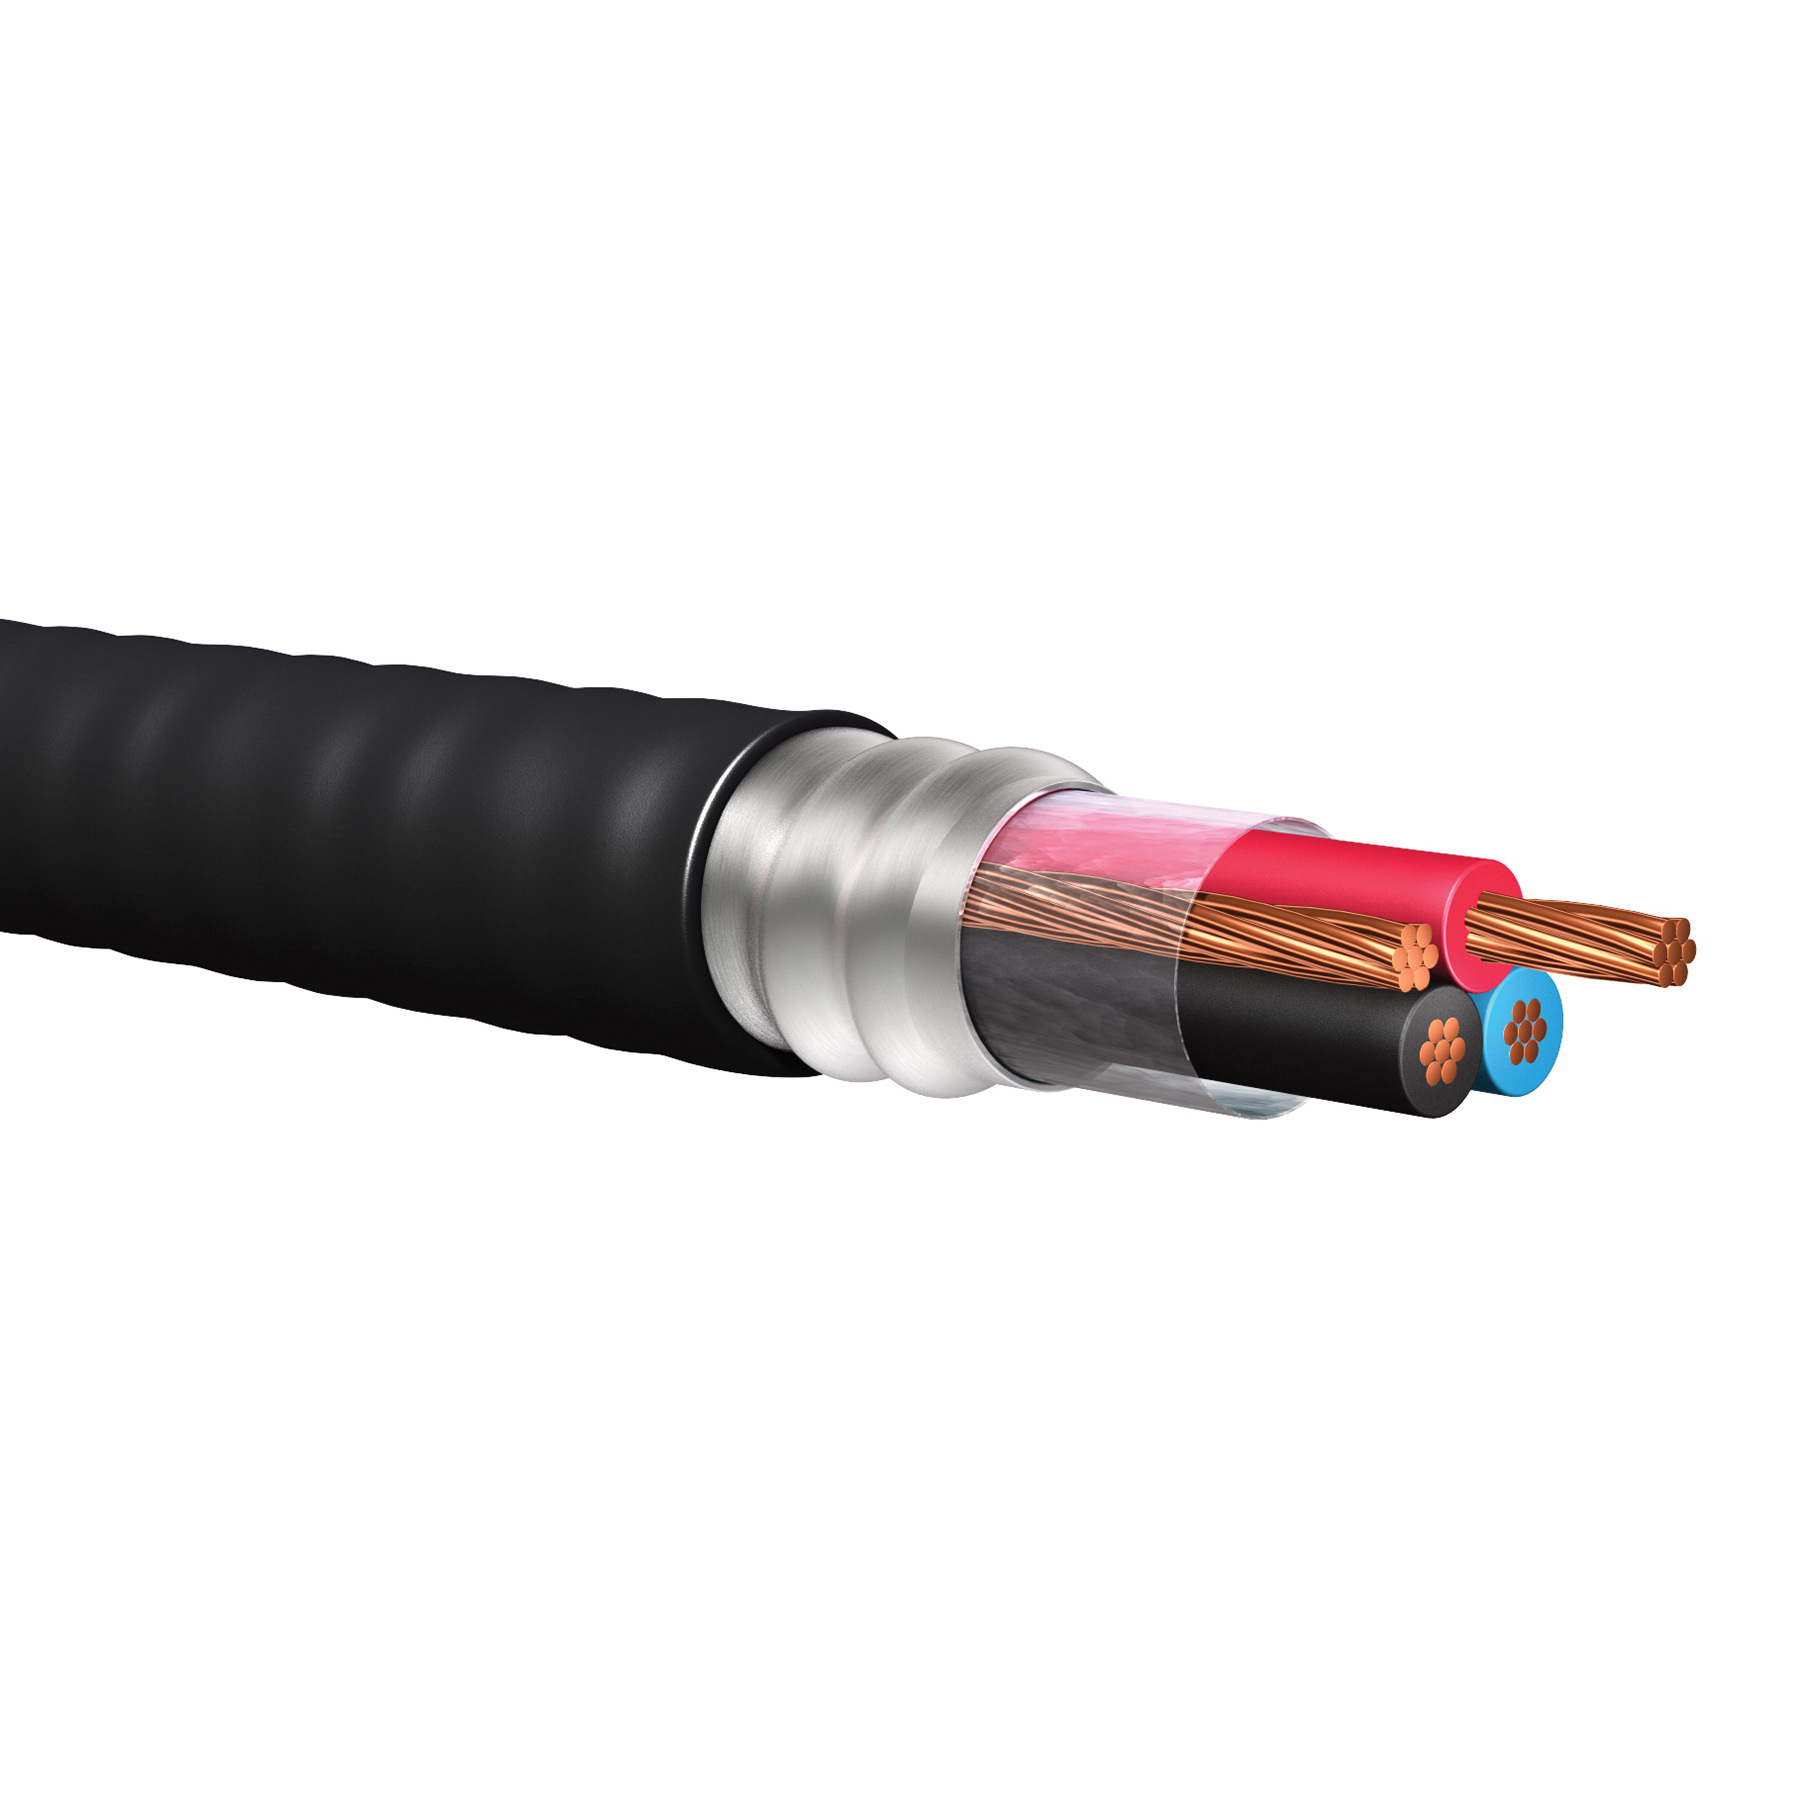 UL Certificate Teck Mc-Hl Cable 600V Armoured Power Cable 14/3